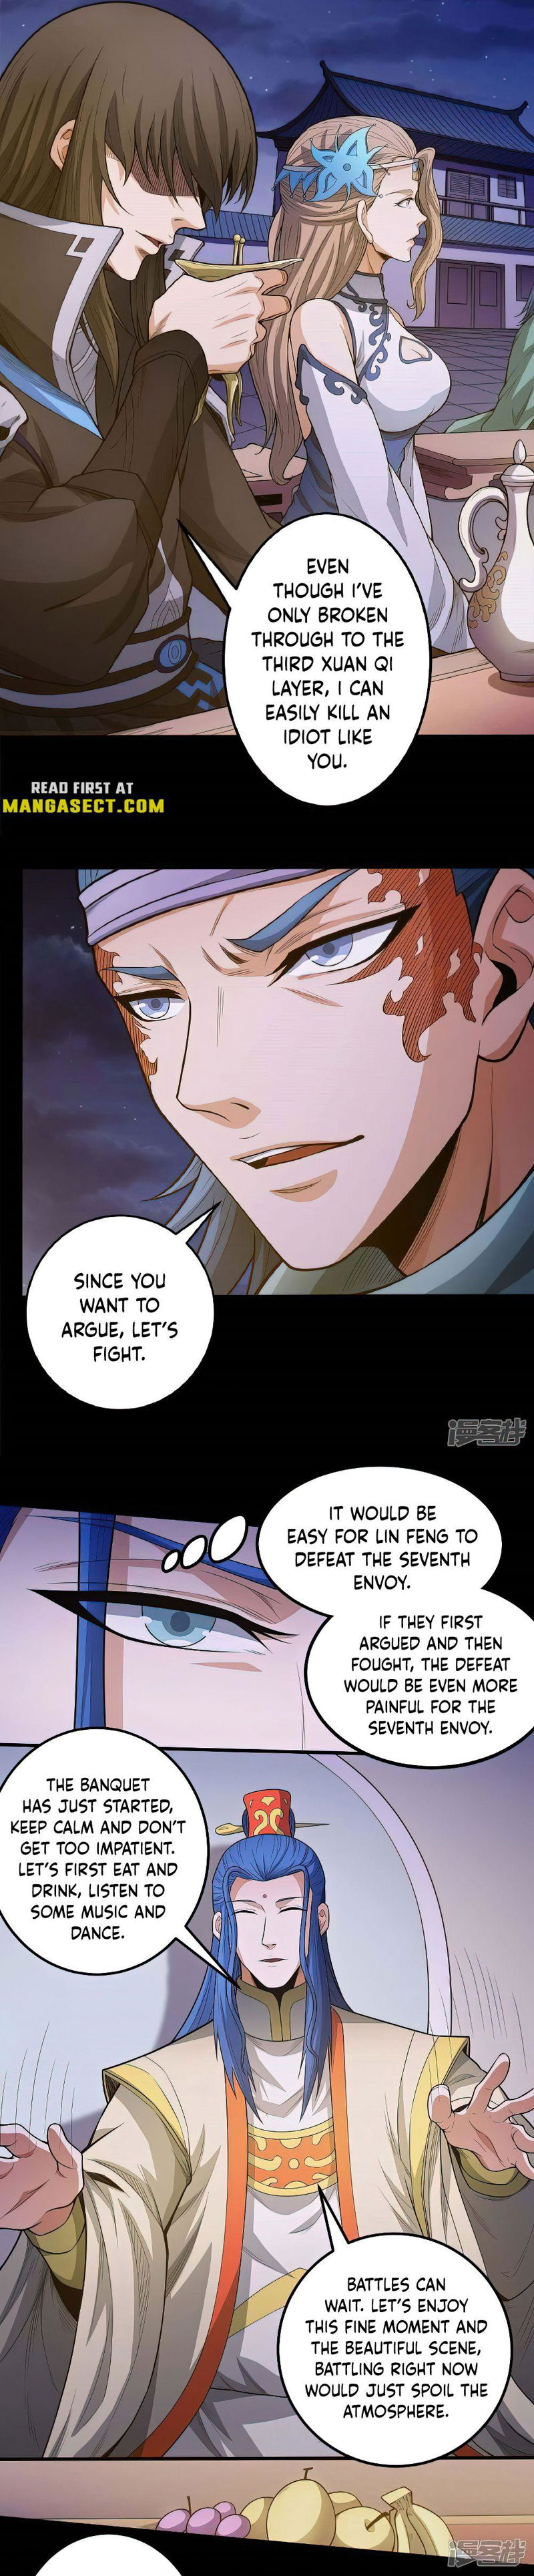 God of Martial Arts Chapter 605 page 3